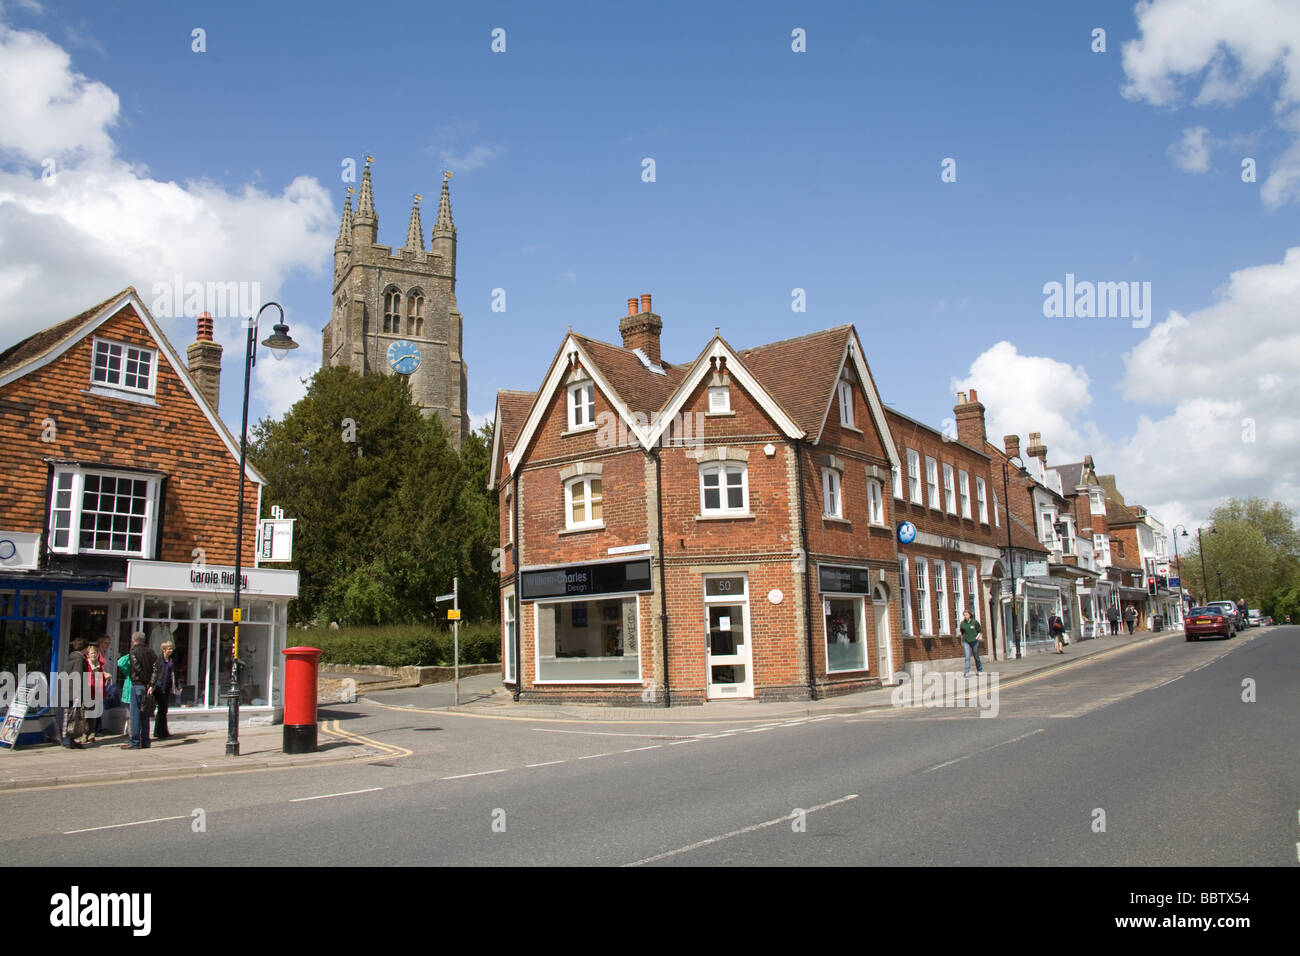 Tenterden Kent England UK May Looking along the wide main street with the church tower a notable landmark Stock Photo